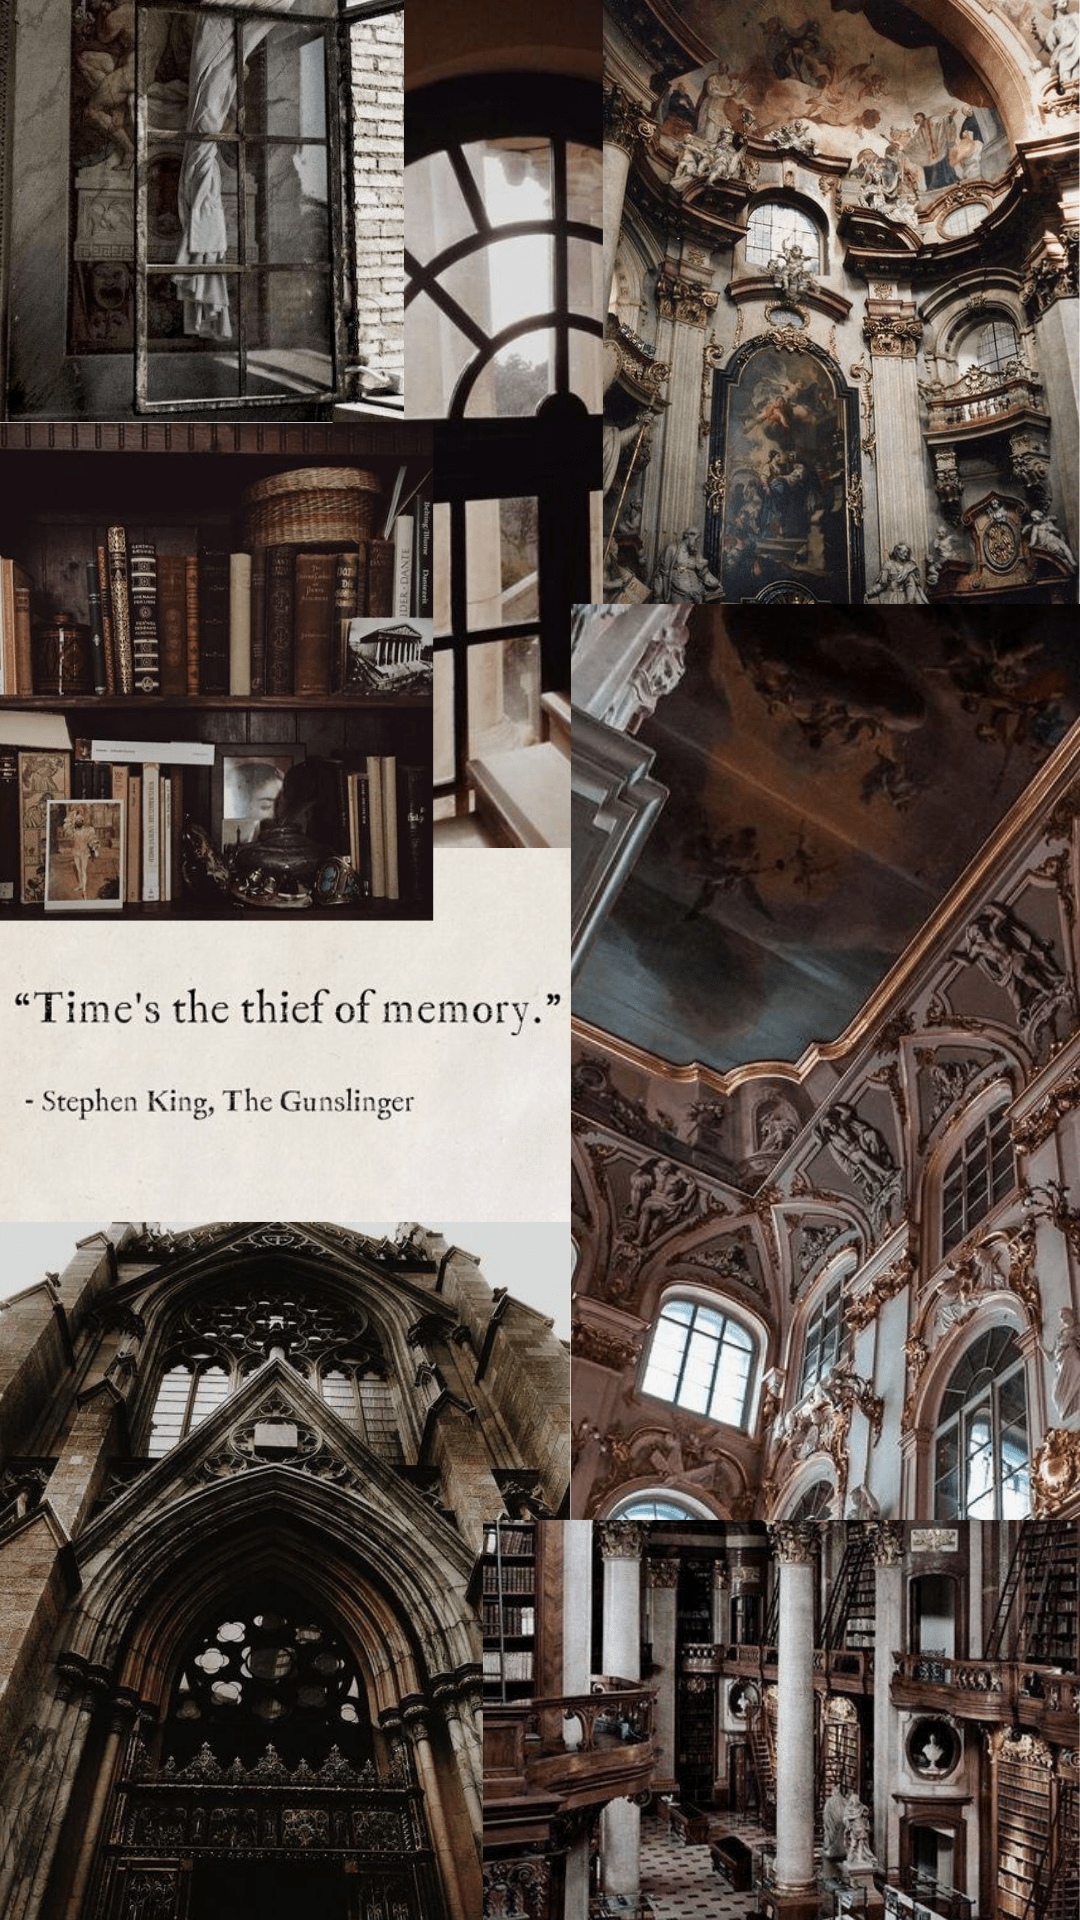 Time's the thief of memory. - Dark academia, Harry Potter, light academia, Goblincore, architecture, royalcore, library